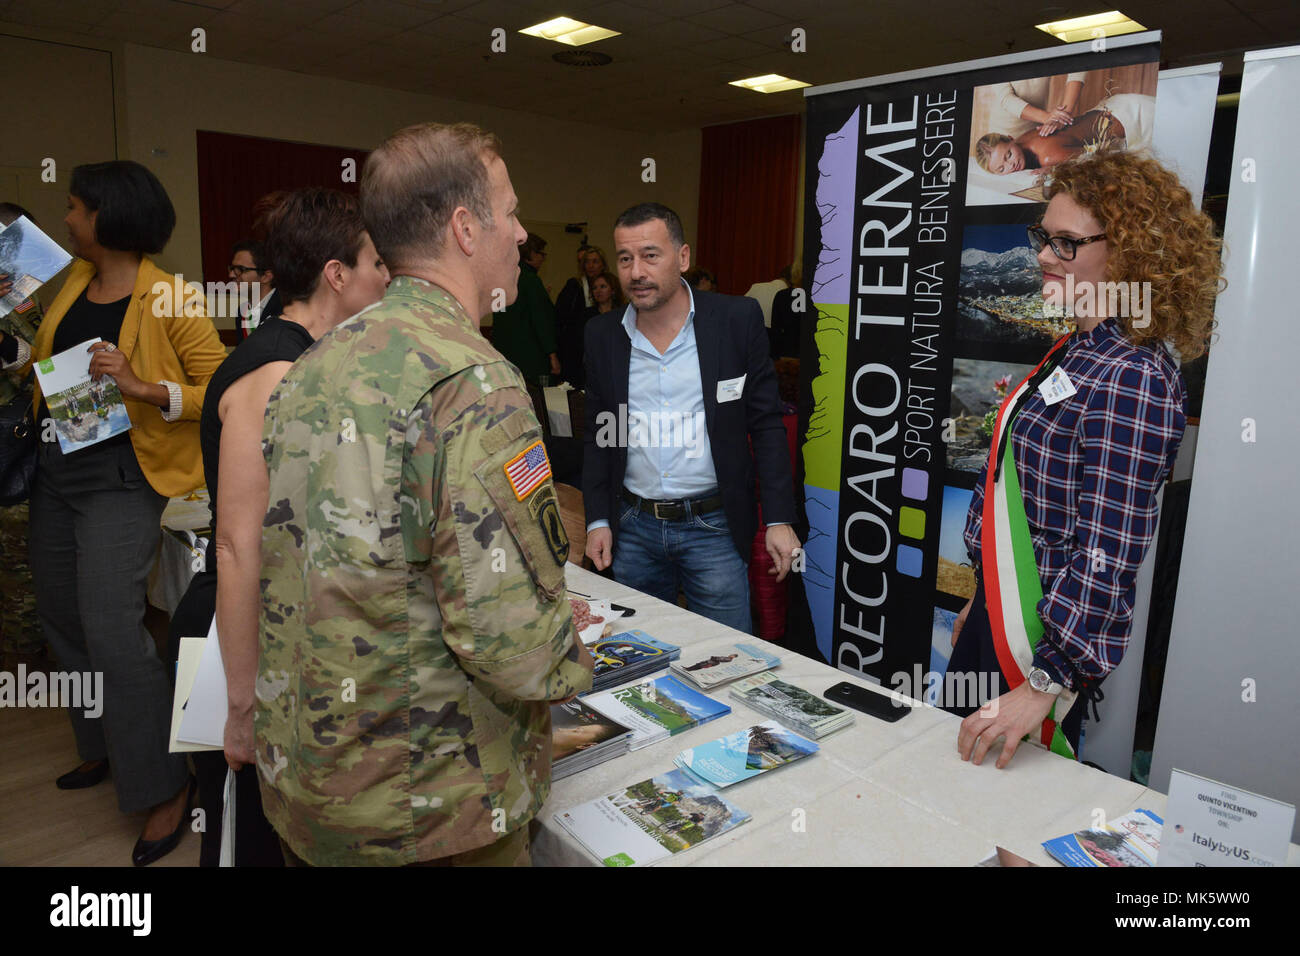 U.S. Col. Eric M. Berdy, U.S. Army Garrison Italy commander, speaks with Lisa Storti, councilwoman of Recoaro Terme, during the Meet the Mayors event at the Golden Lion Conference Center on Caserma Ederle, Vicenza, Italy, Nov. 8, 2017.   The event is an informal fair that hosts mayors, council members, and cultural and tourism representatives from Italian townships in the Vicenza and Padova provinces. (U.S. Army Photo by Paolo Bovo) Stock Photo